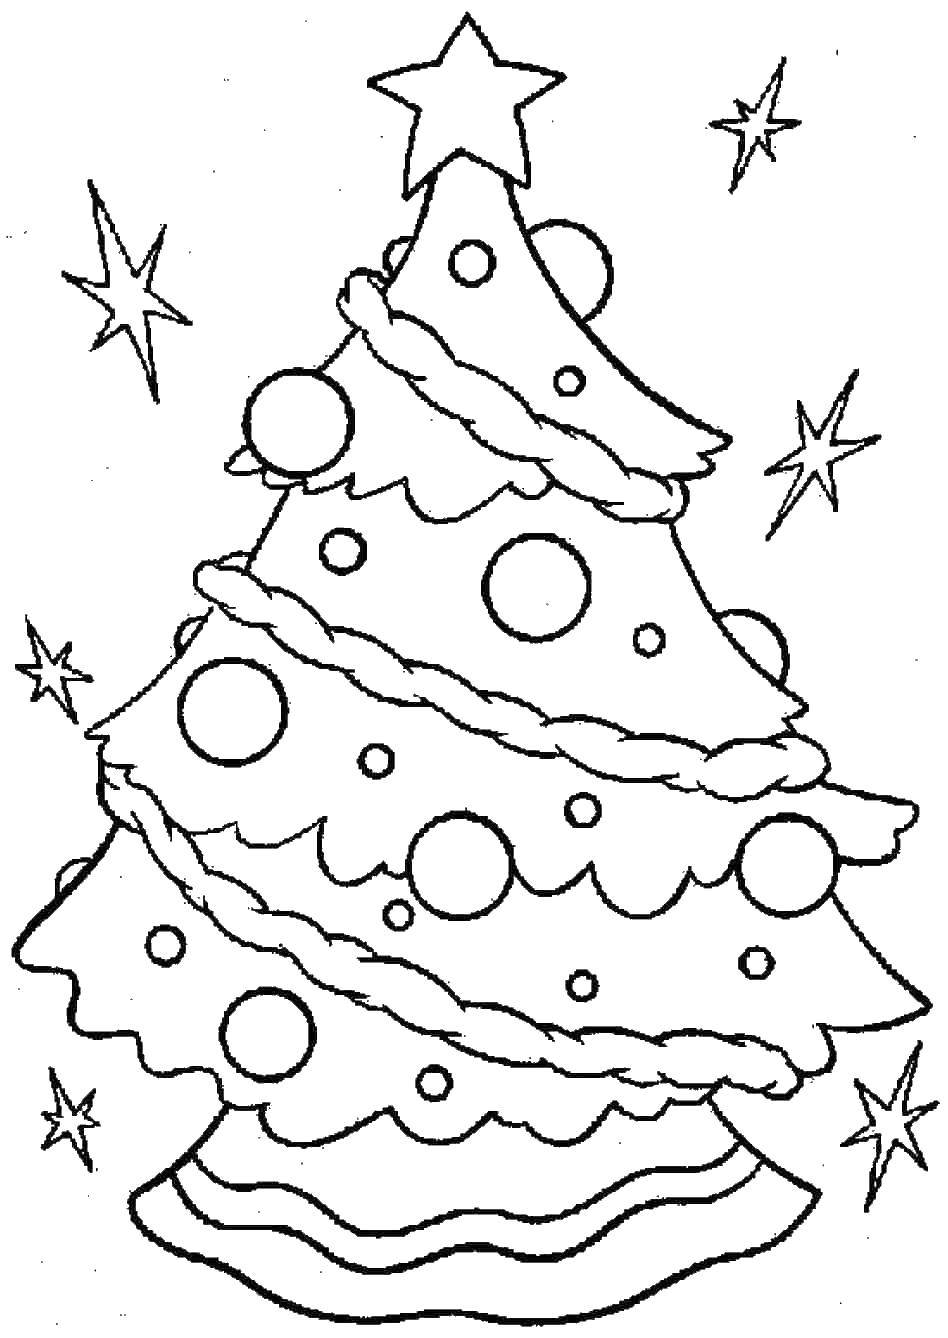 Coloring Tree in the woods at night. Category coloring Christmas tree. Tags:  tree.